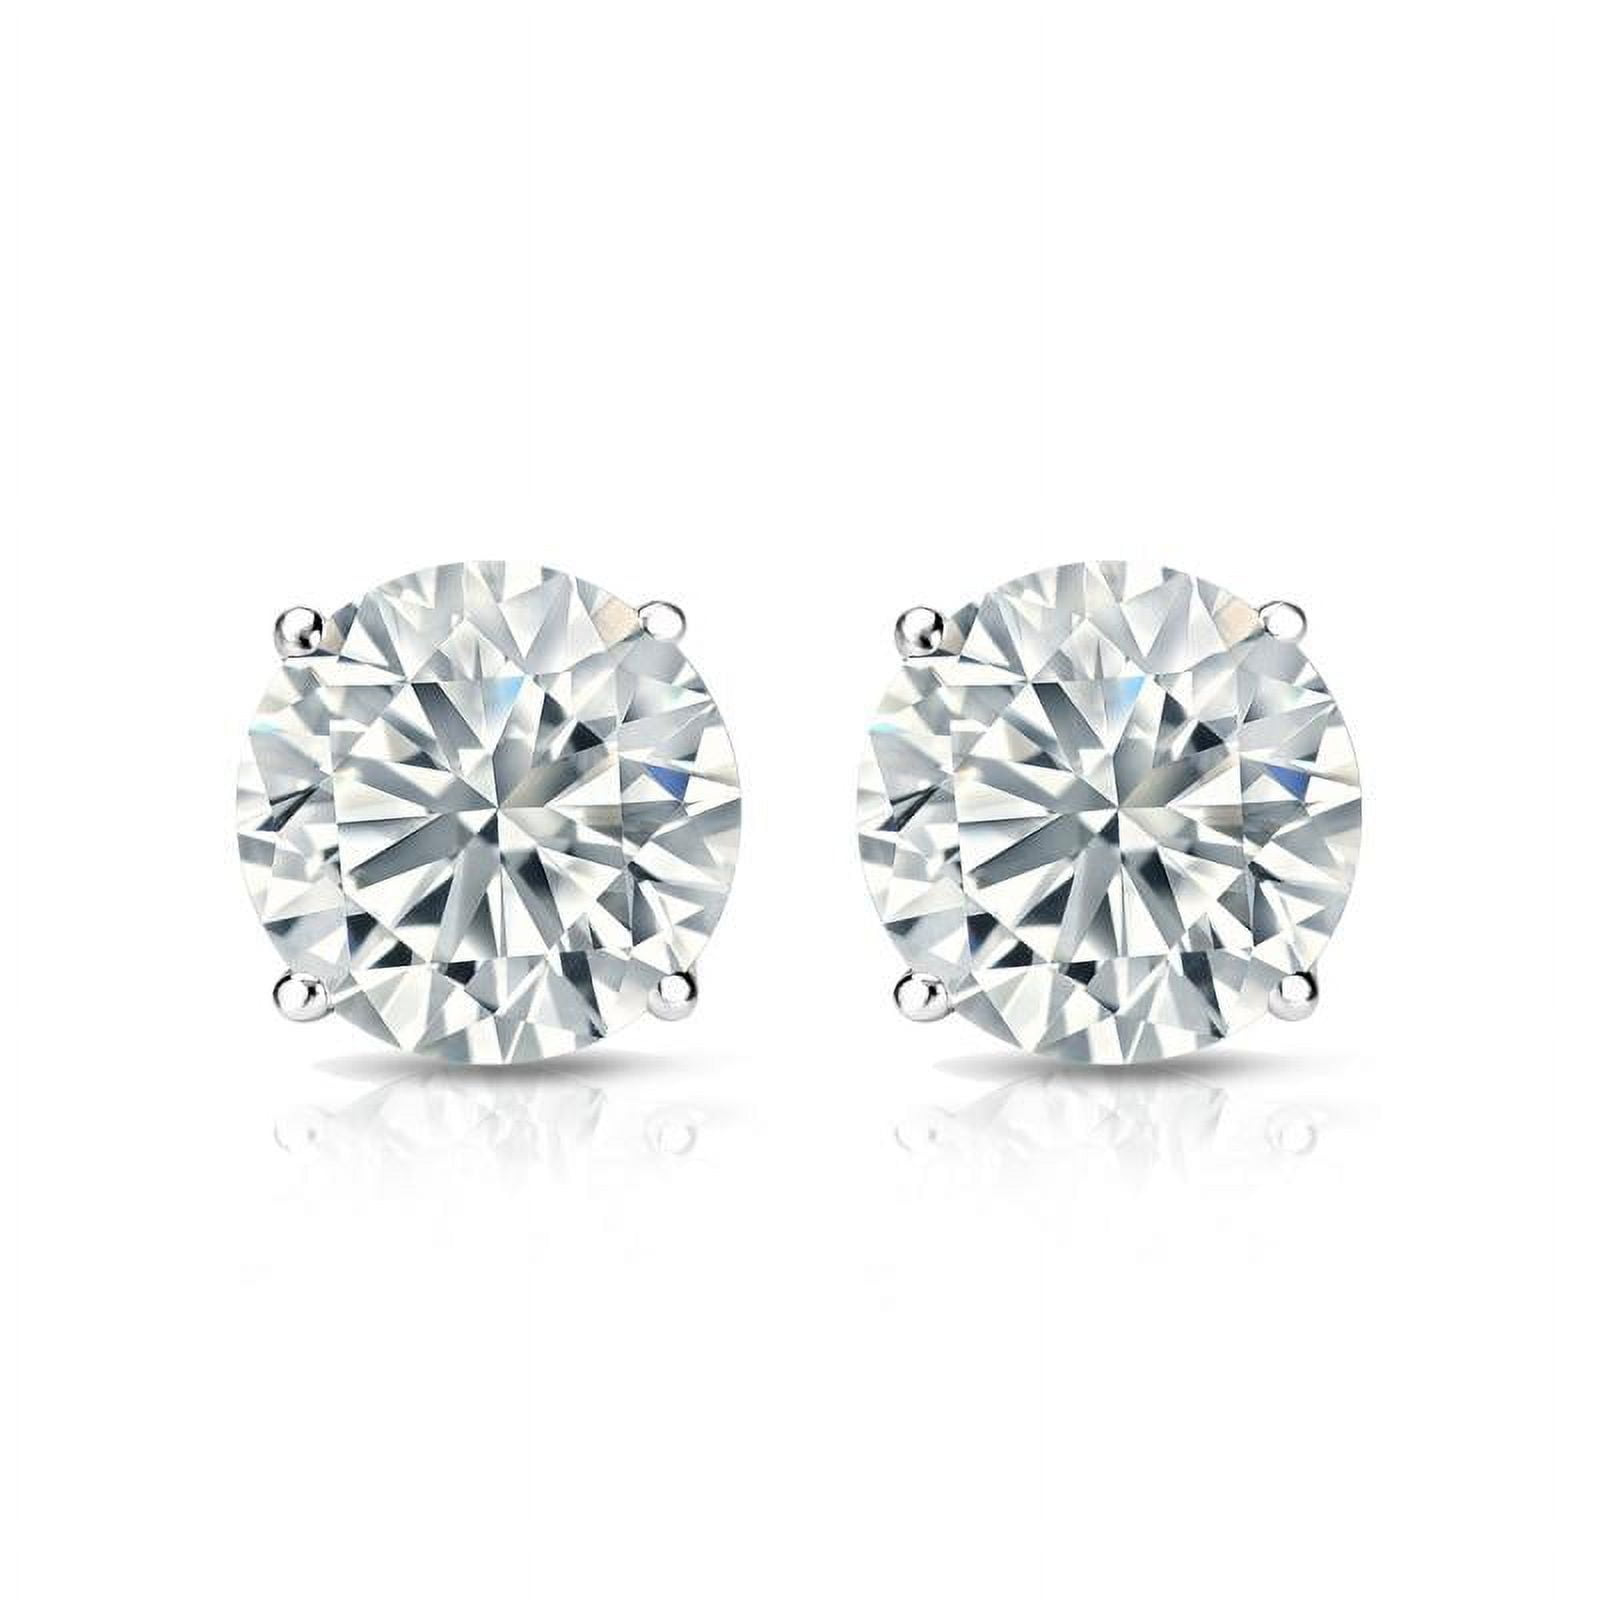 1 Carat Round Diamond - 4 Prong Solitaire Stud Earrings - 18K White Gold  Plating Over Silver 